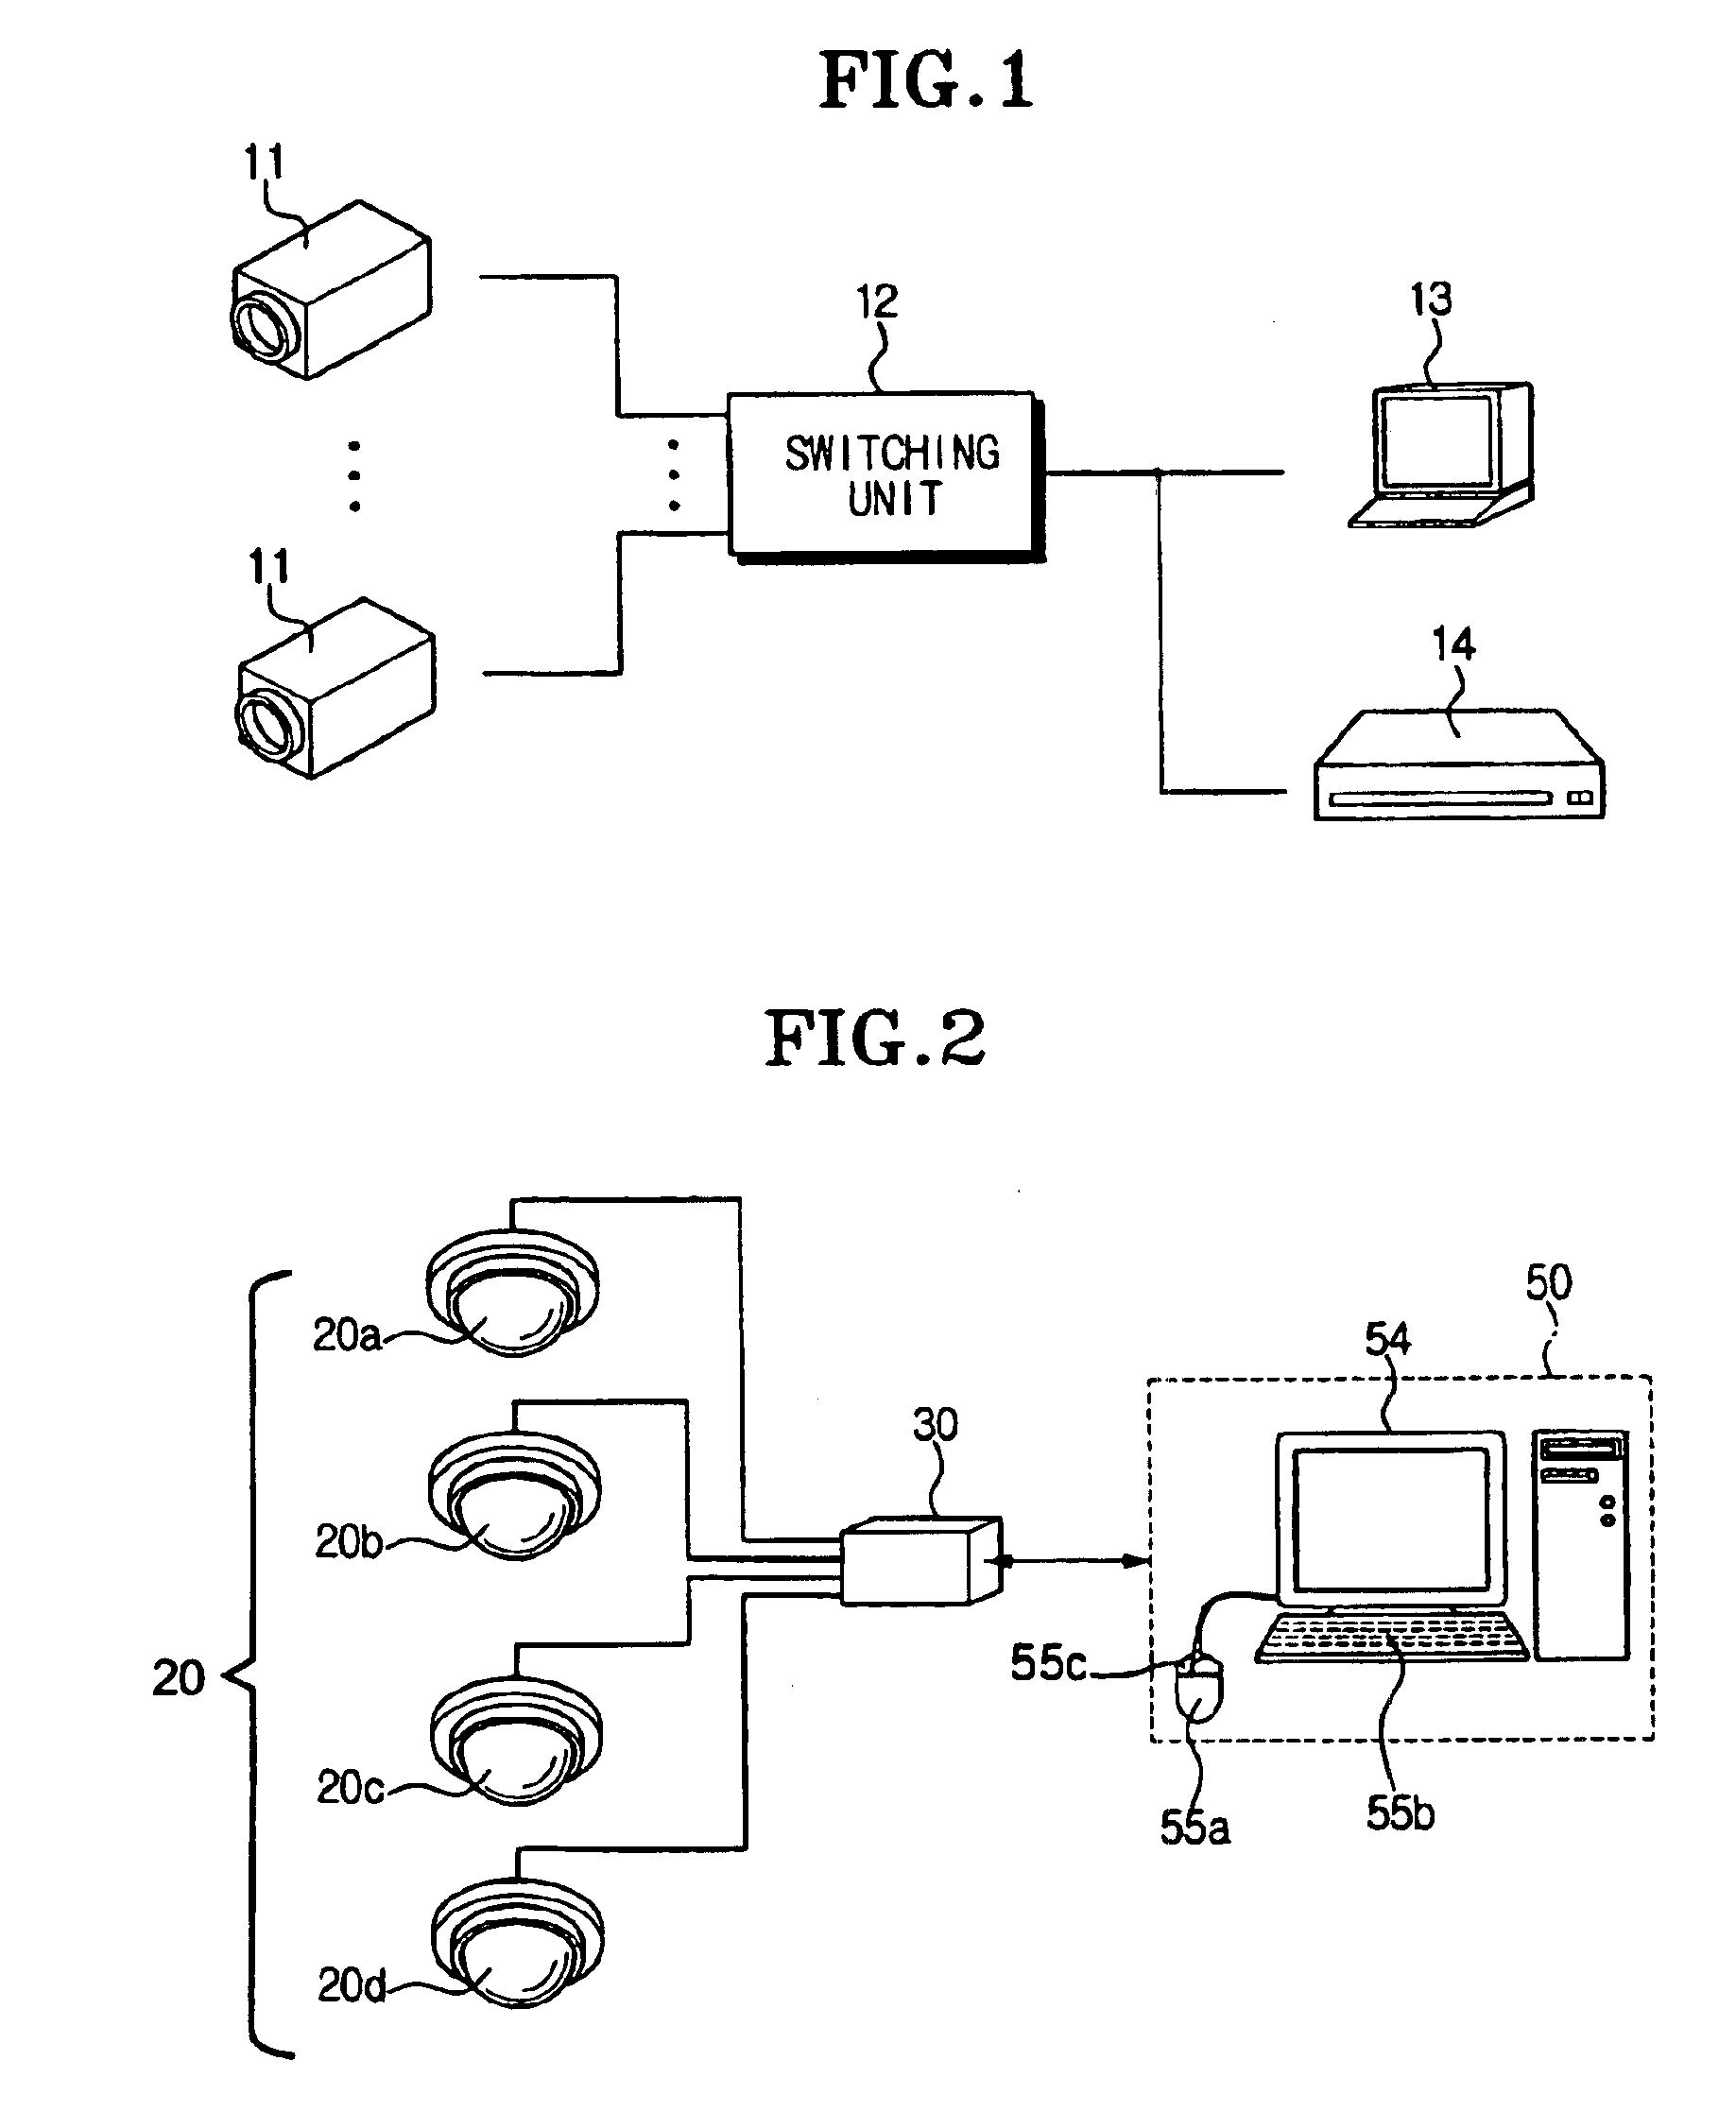 Multichannel image processor and security system employing the same